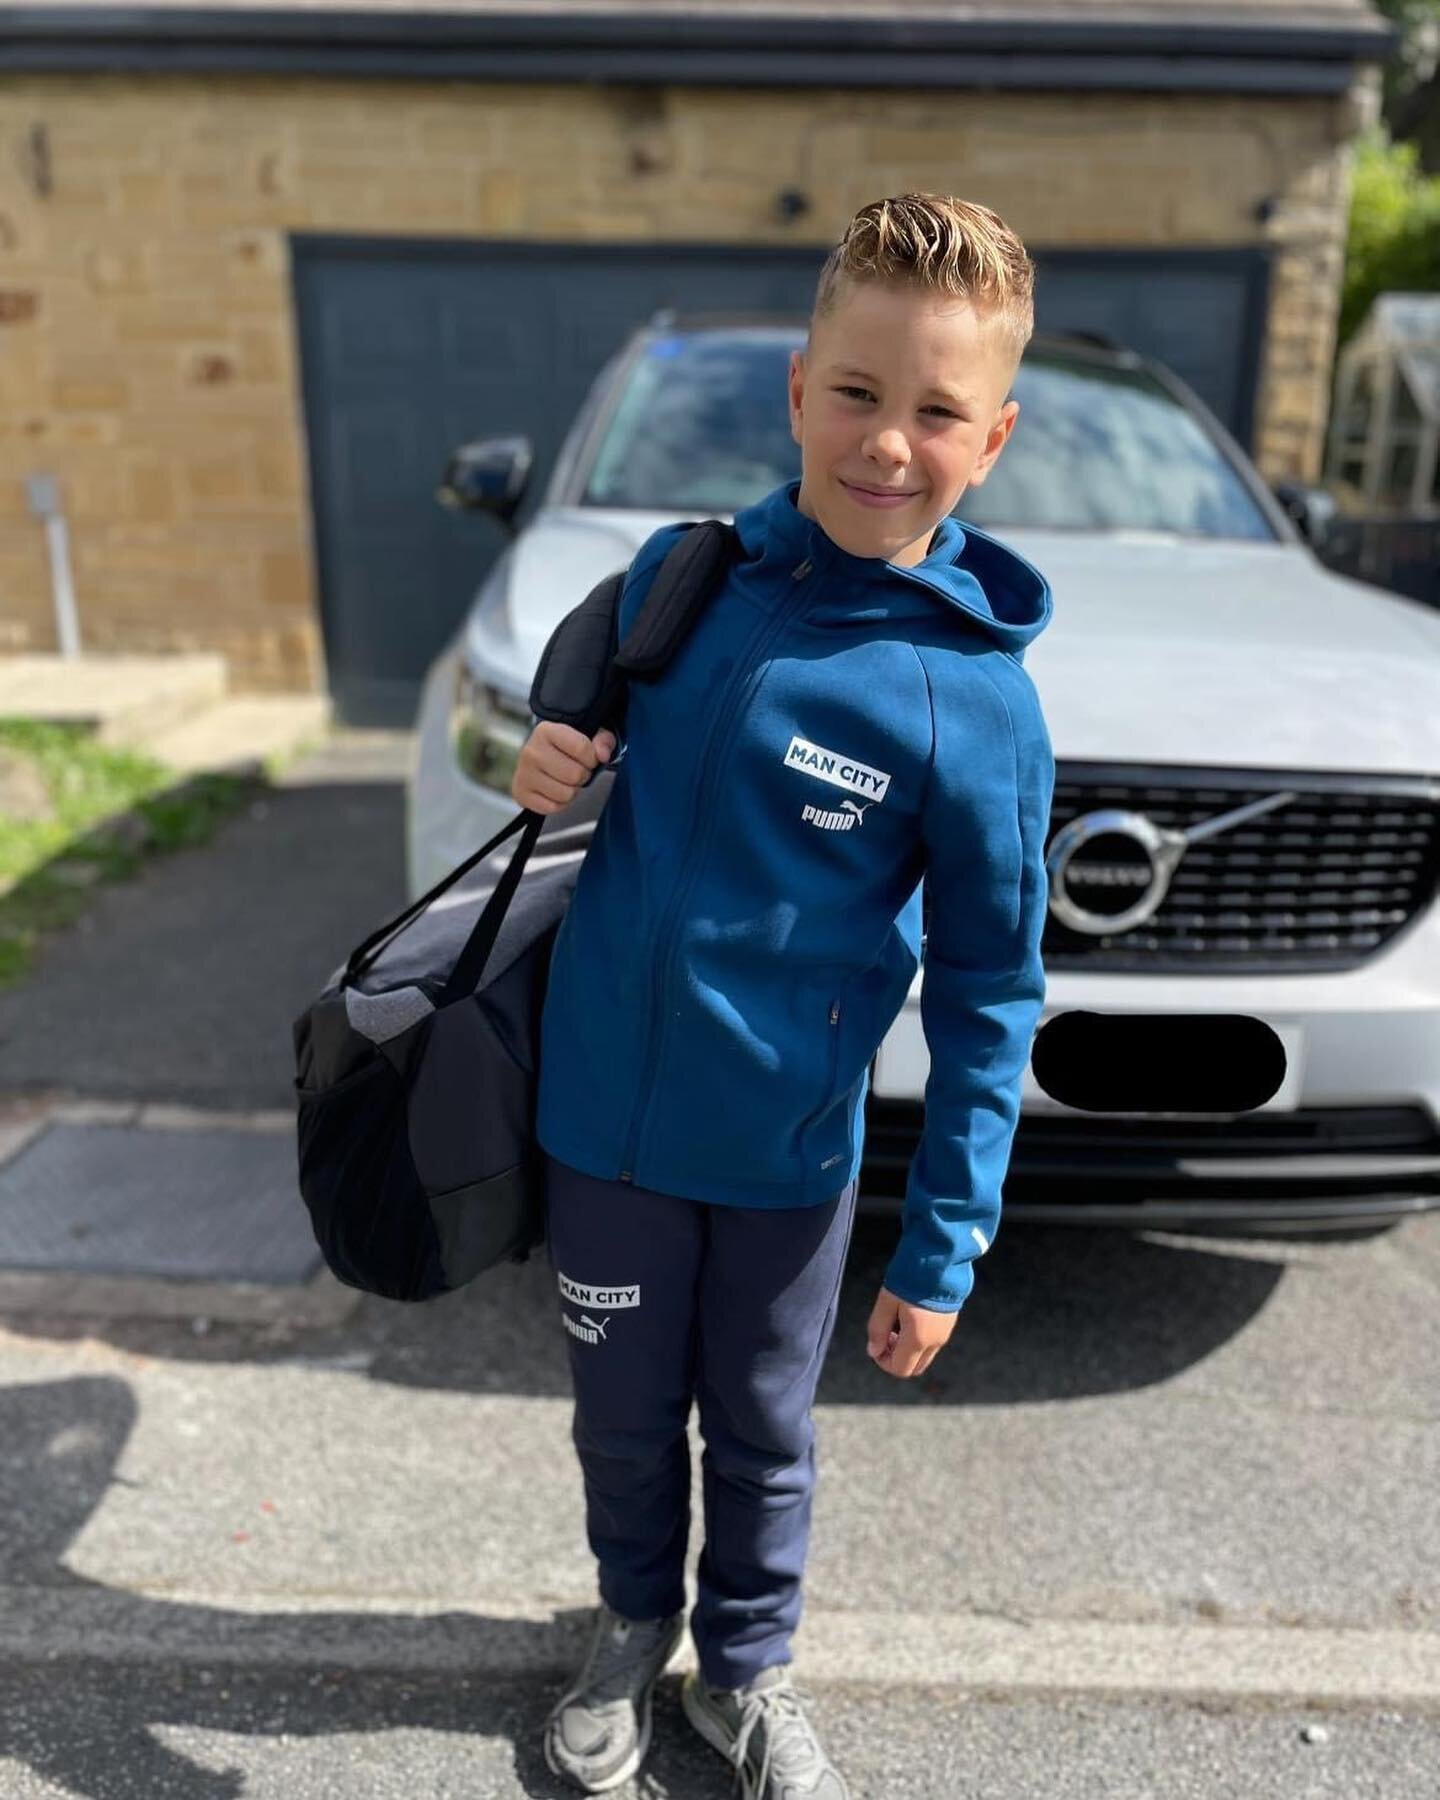 &hellip;.and we&rsquo;re back!!! 🥅⚽️🥅⚽️

Second year of being signed and he&rsquo;s back &amp; ready!!! Under 10s Goalie &hellip; let&rsquo;s go!!! 

Off on a team bonding weekend with his coaches &amp; team mates &amp; ready for a year of hard wor